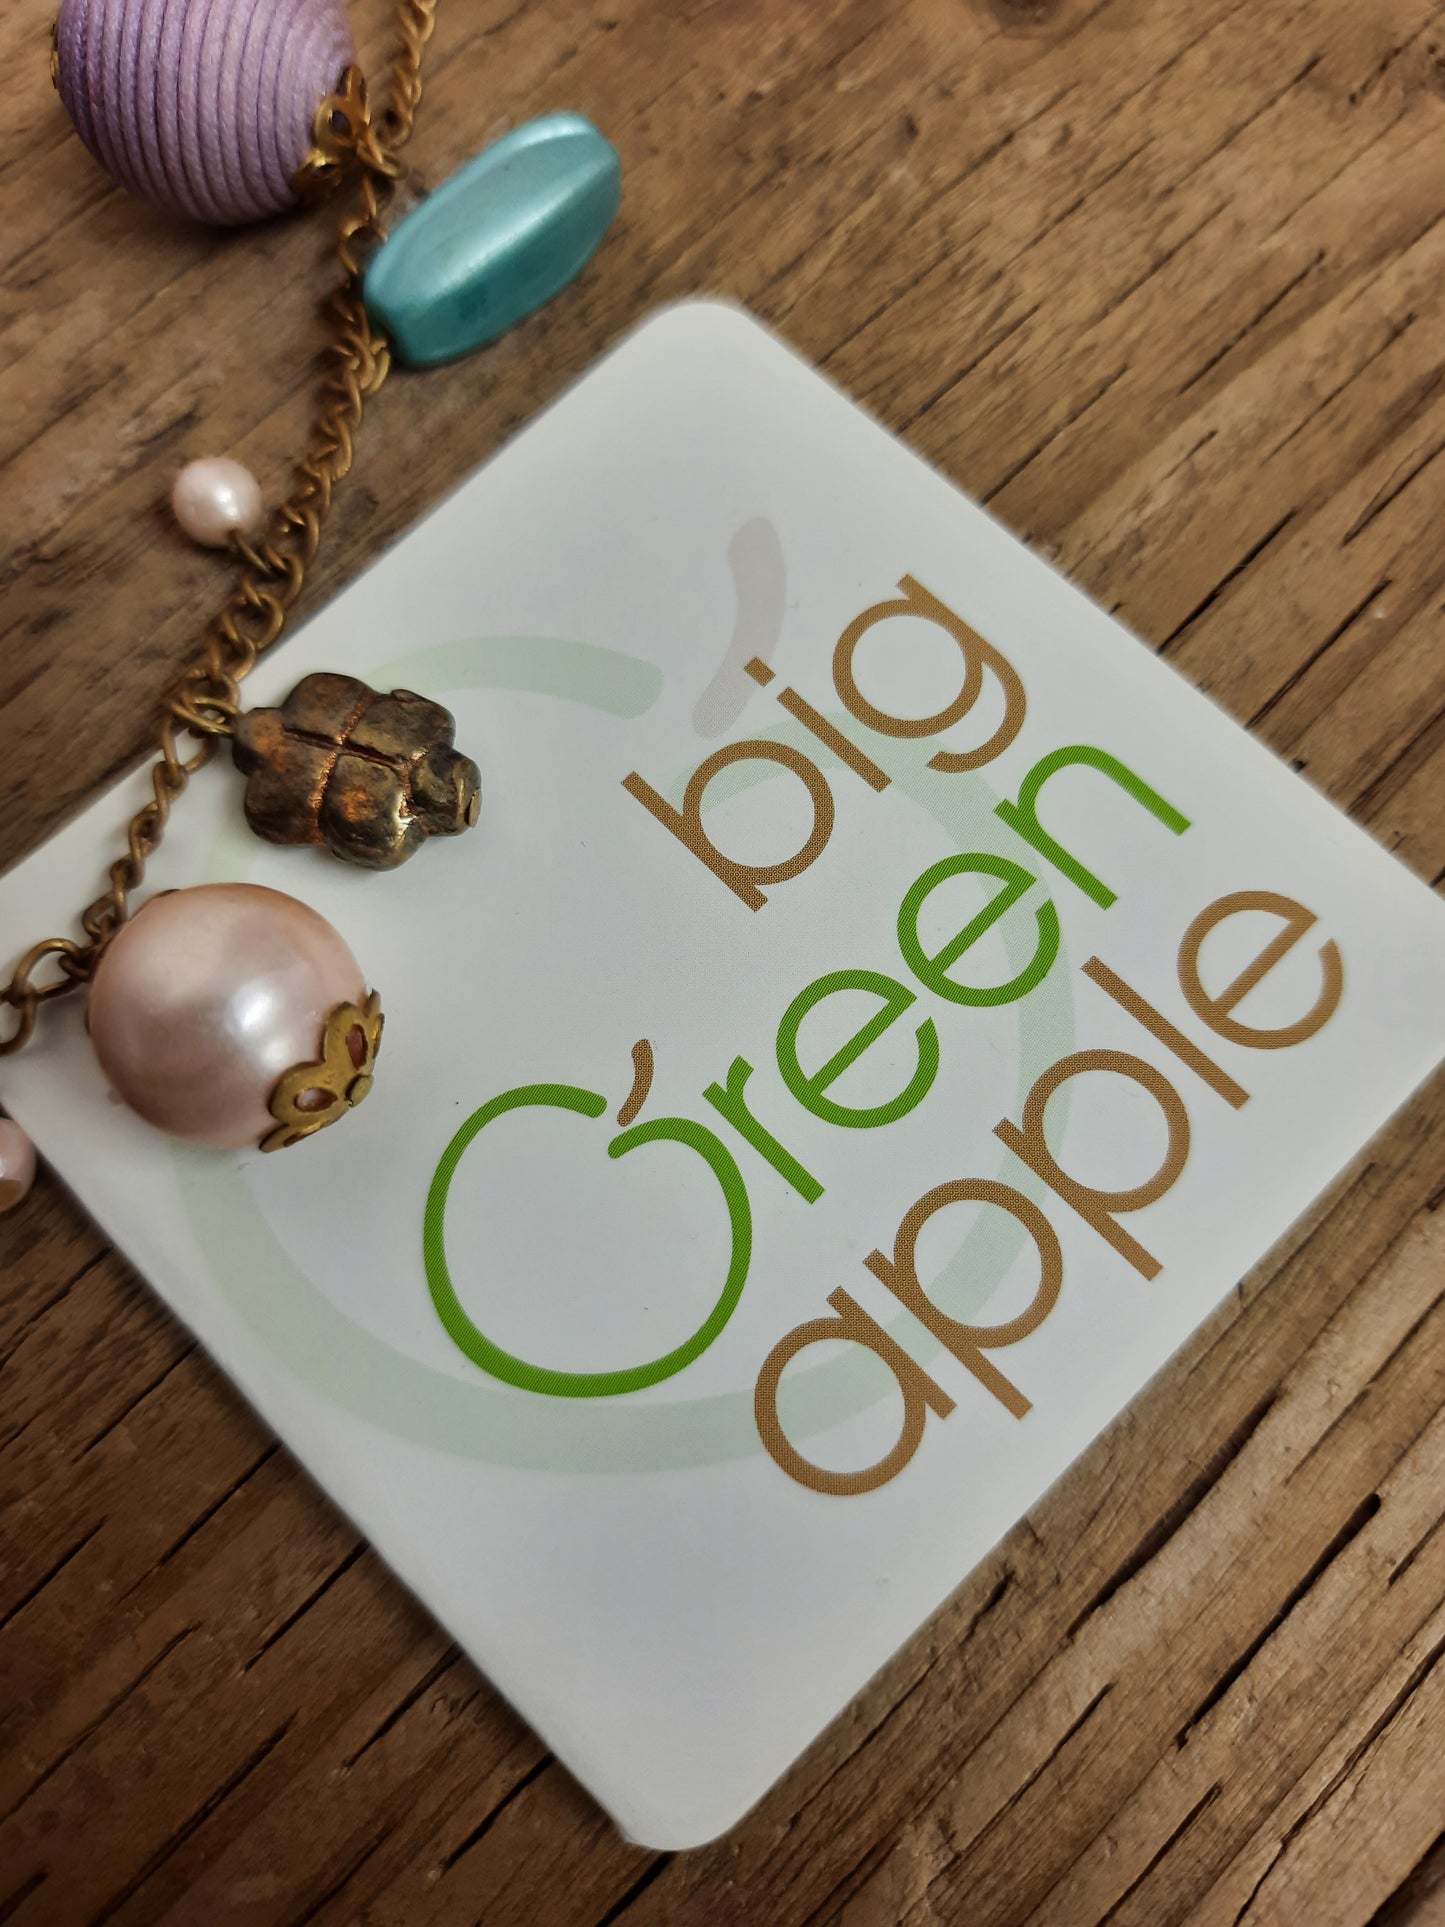 Jewellery Set, Fair Trade Necklaces, Gift Ideas For Women, Ethical Store, Sustainable Company, BIG GREEN APPLE